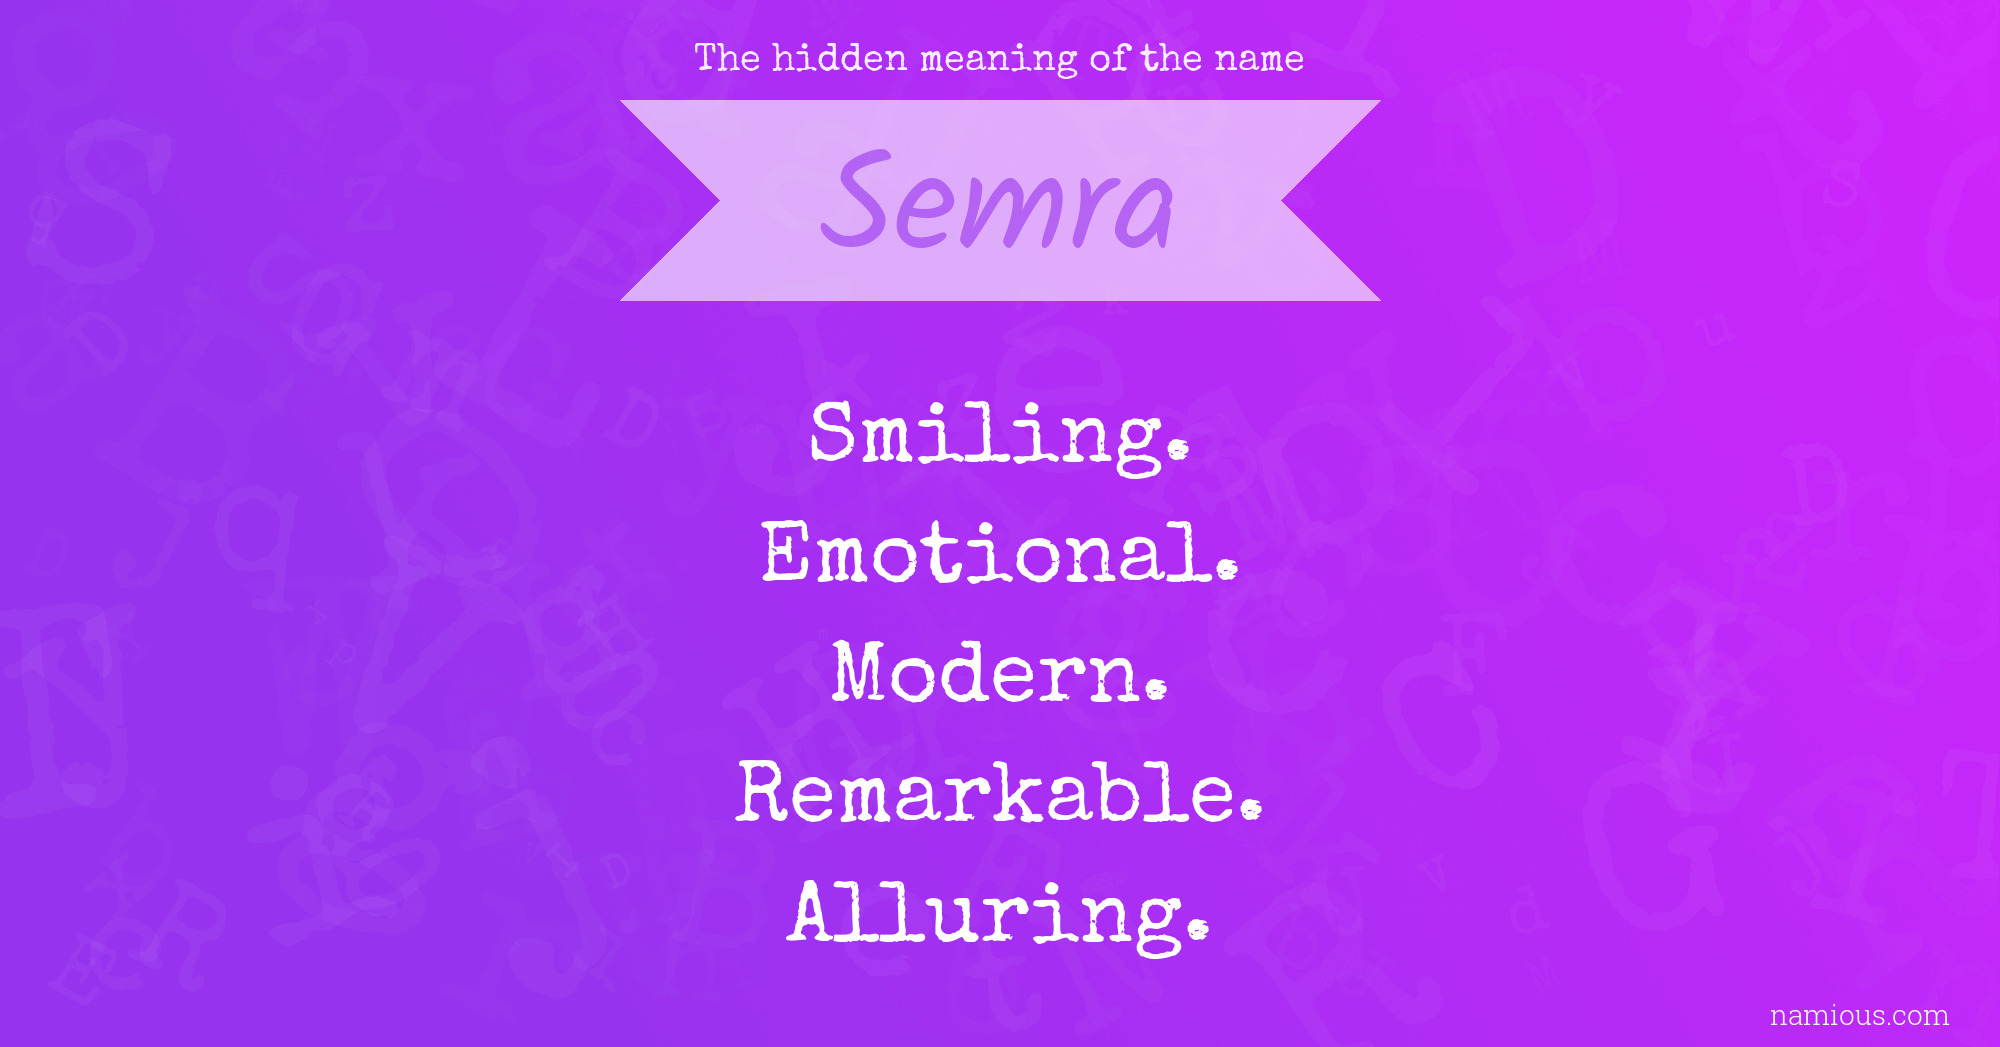 The hidden meaning of the name Semra